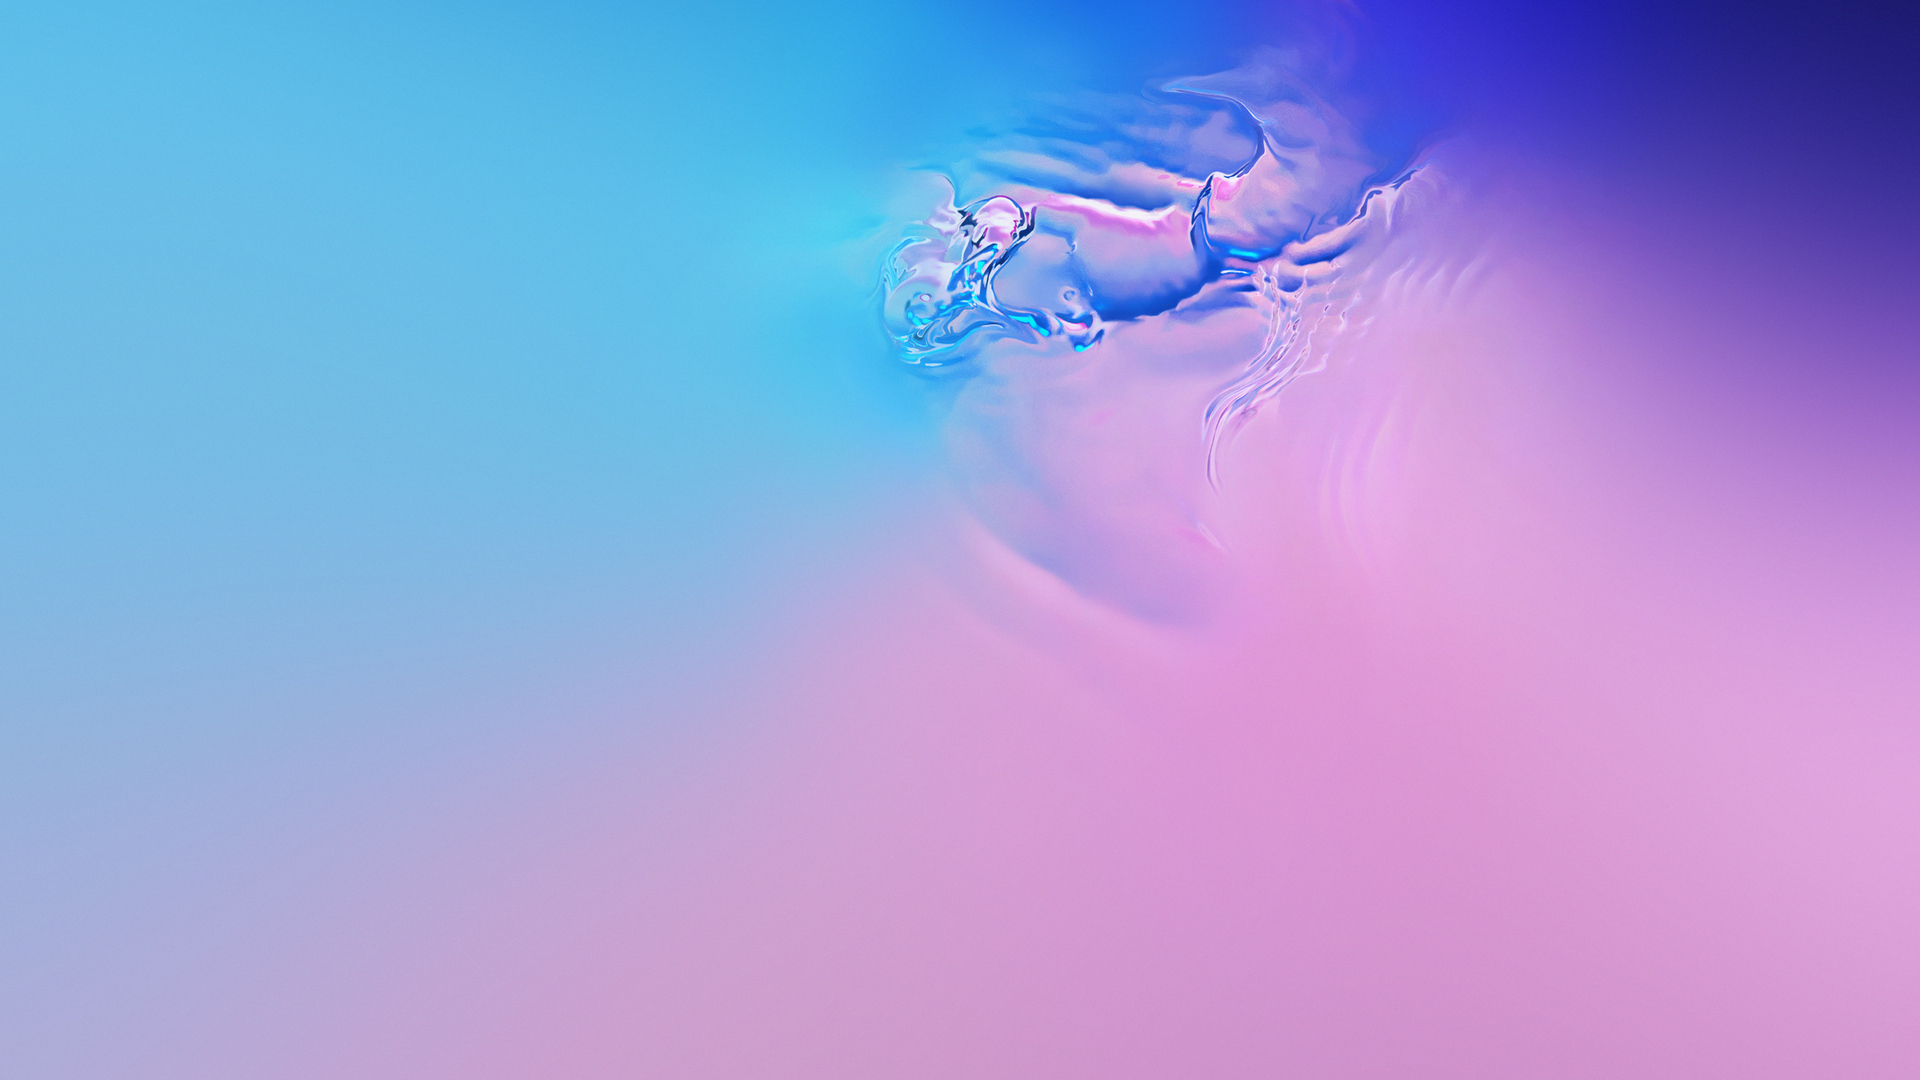 Samsung Galaxy S10 Abstract Wallpapers